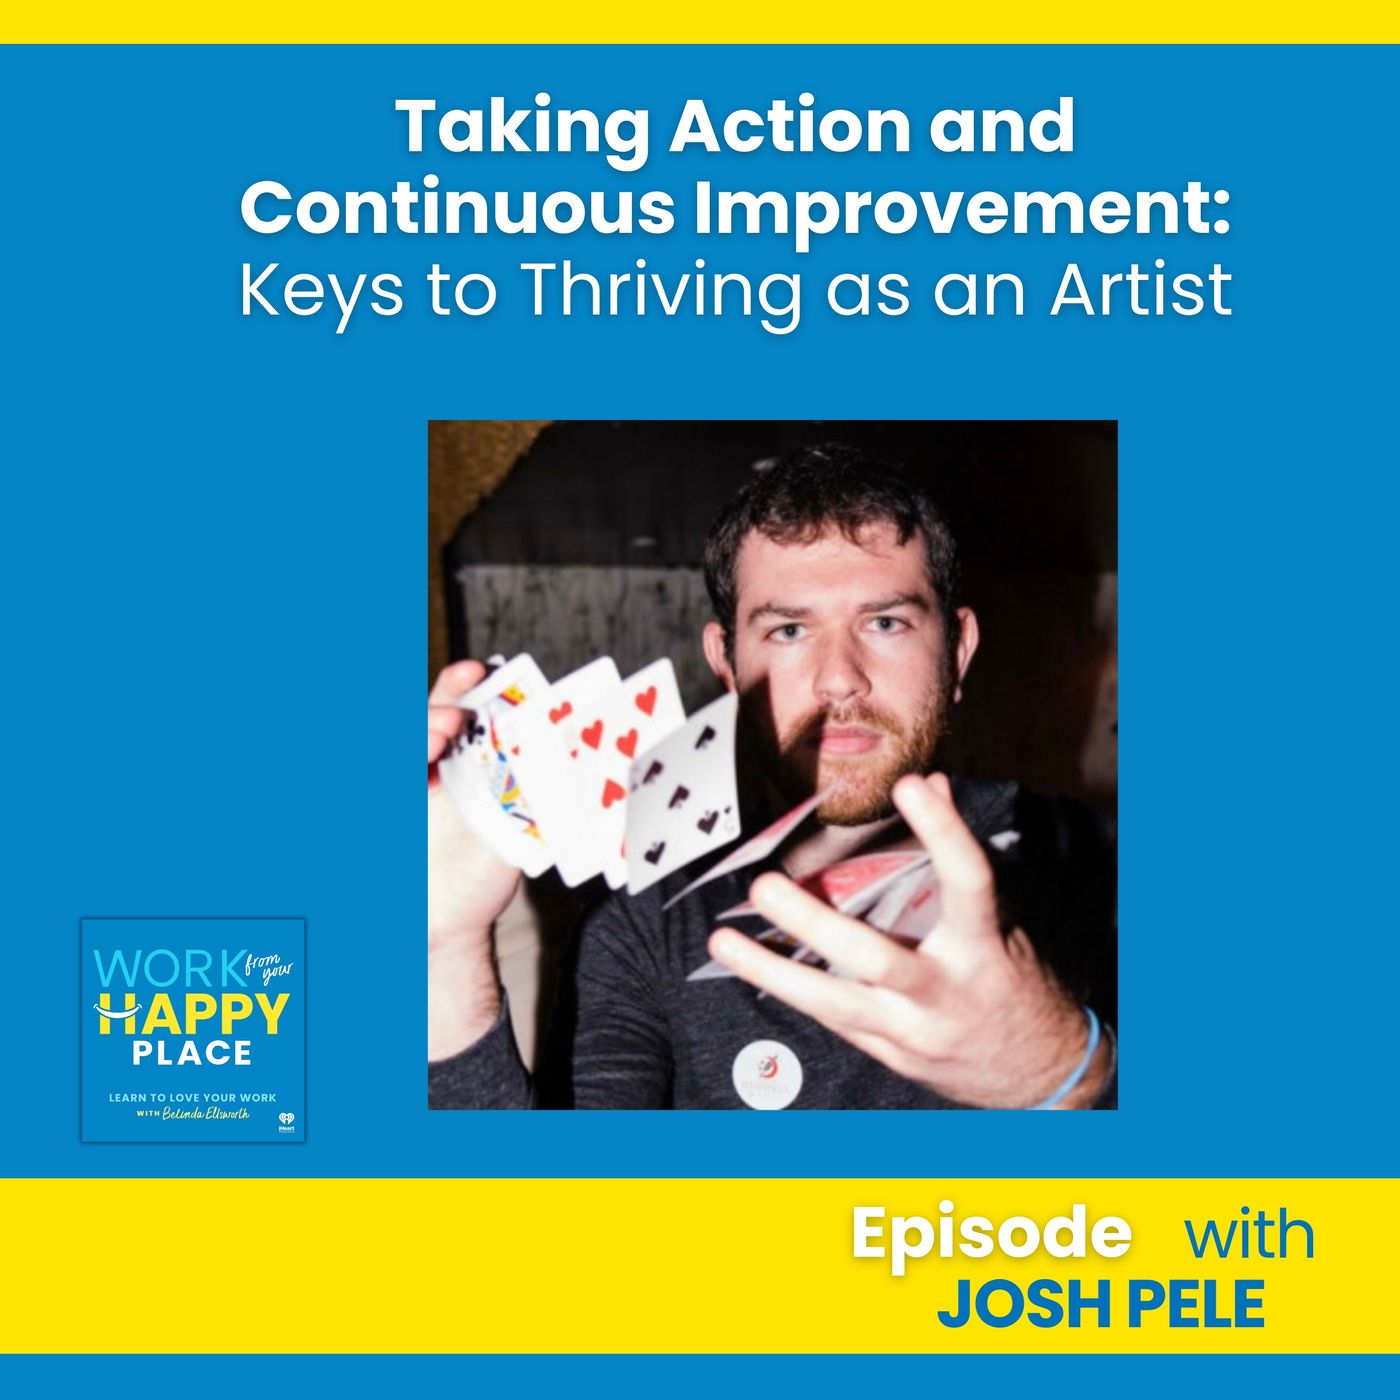 Taking Action and Continuous Improvement: Keys to Thriving as an Artist with Josh Pele